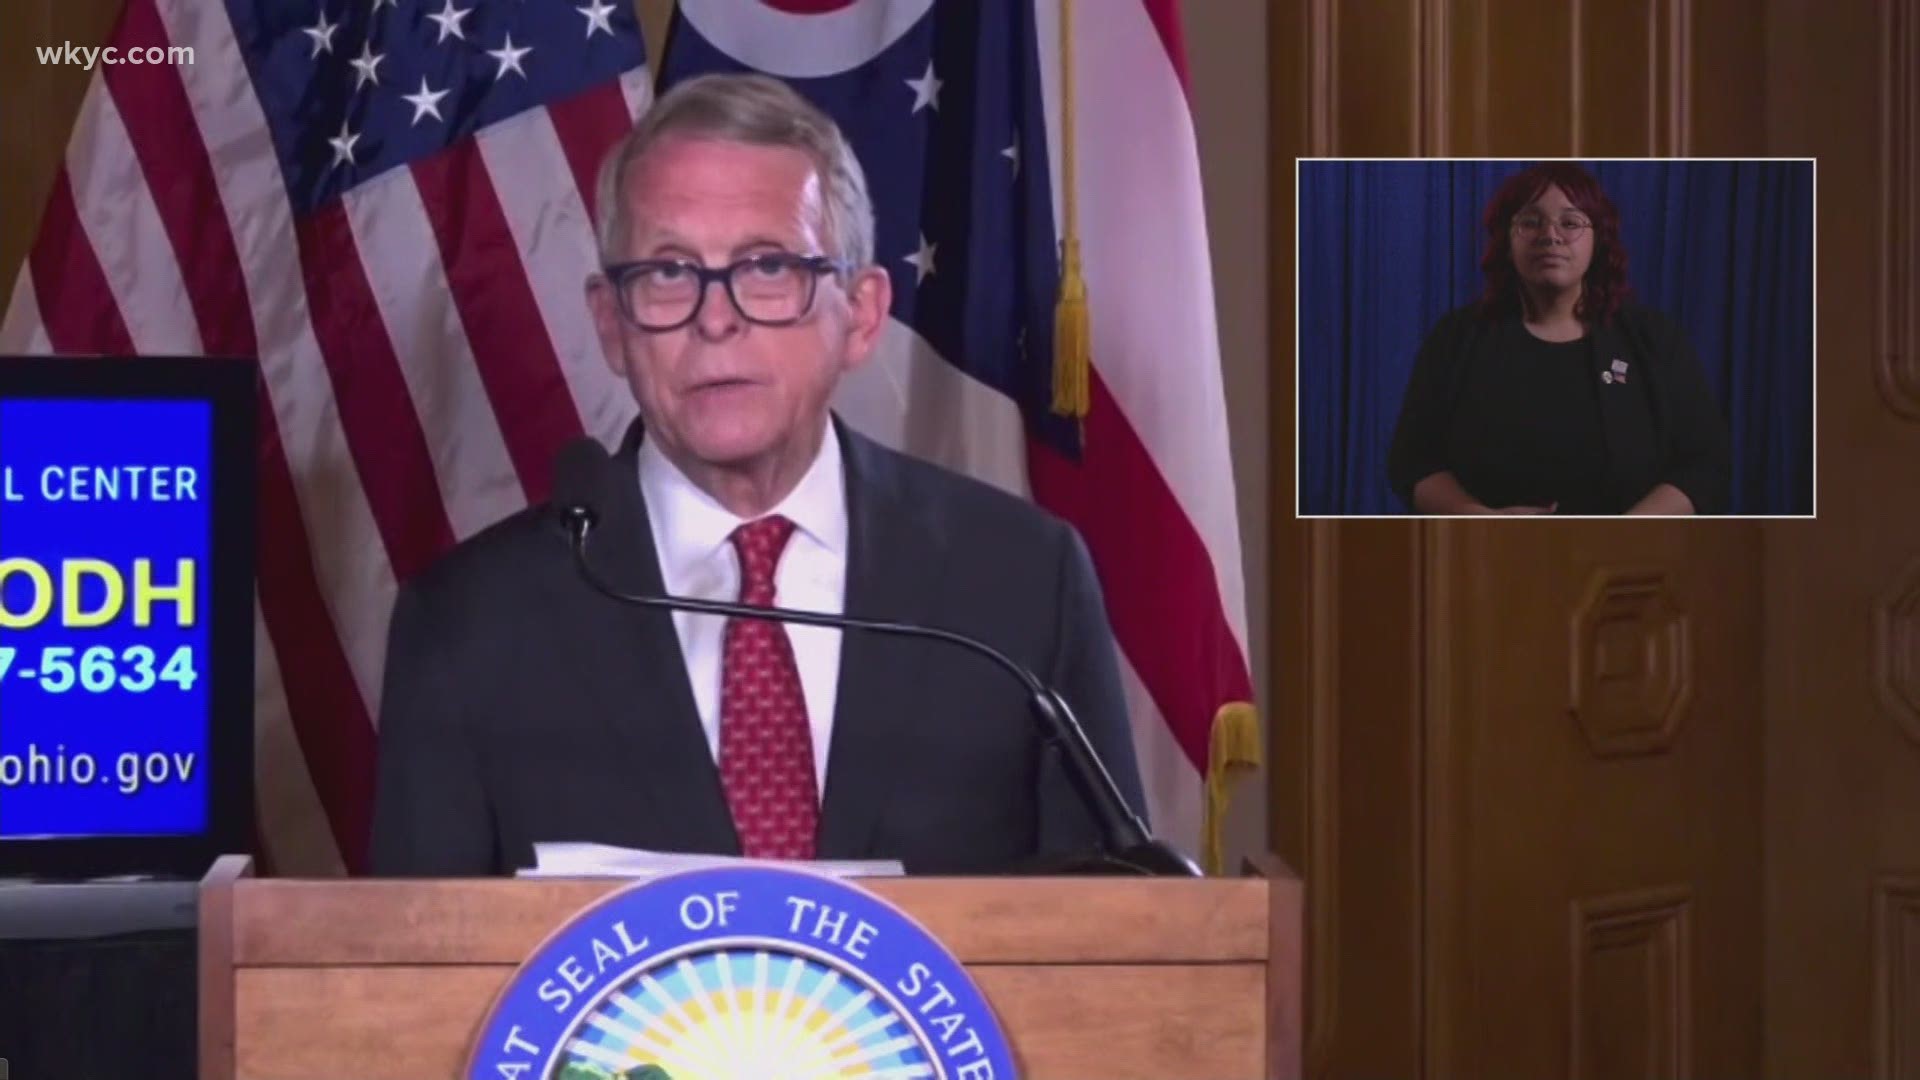 Ohio Governor Mike DeWine announced on Monday that nursing home employees who are fully vaccinated will no longer be required to be tested for COVID-19.